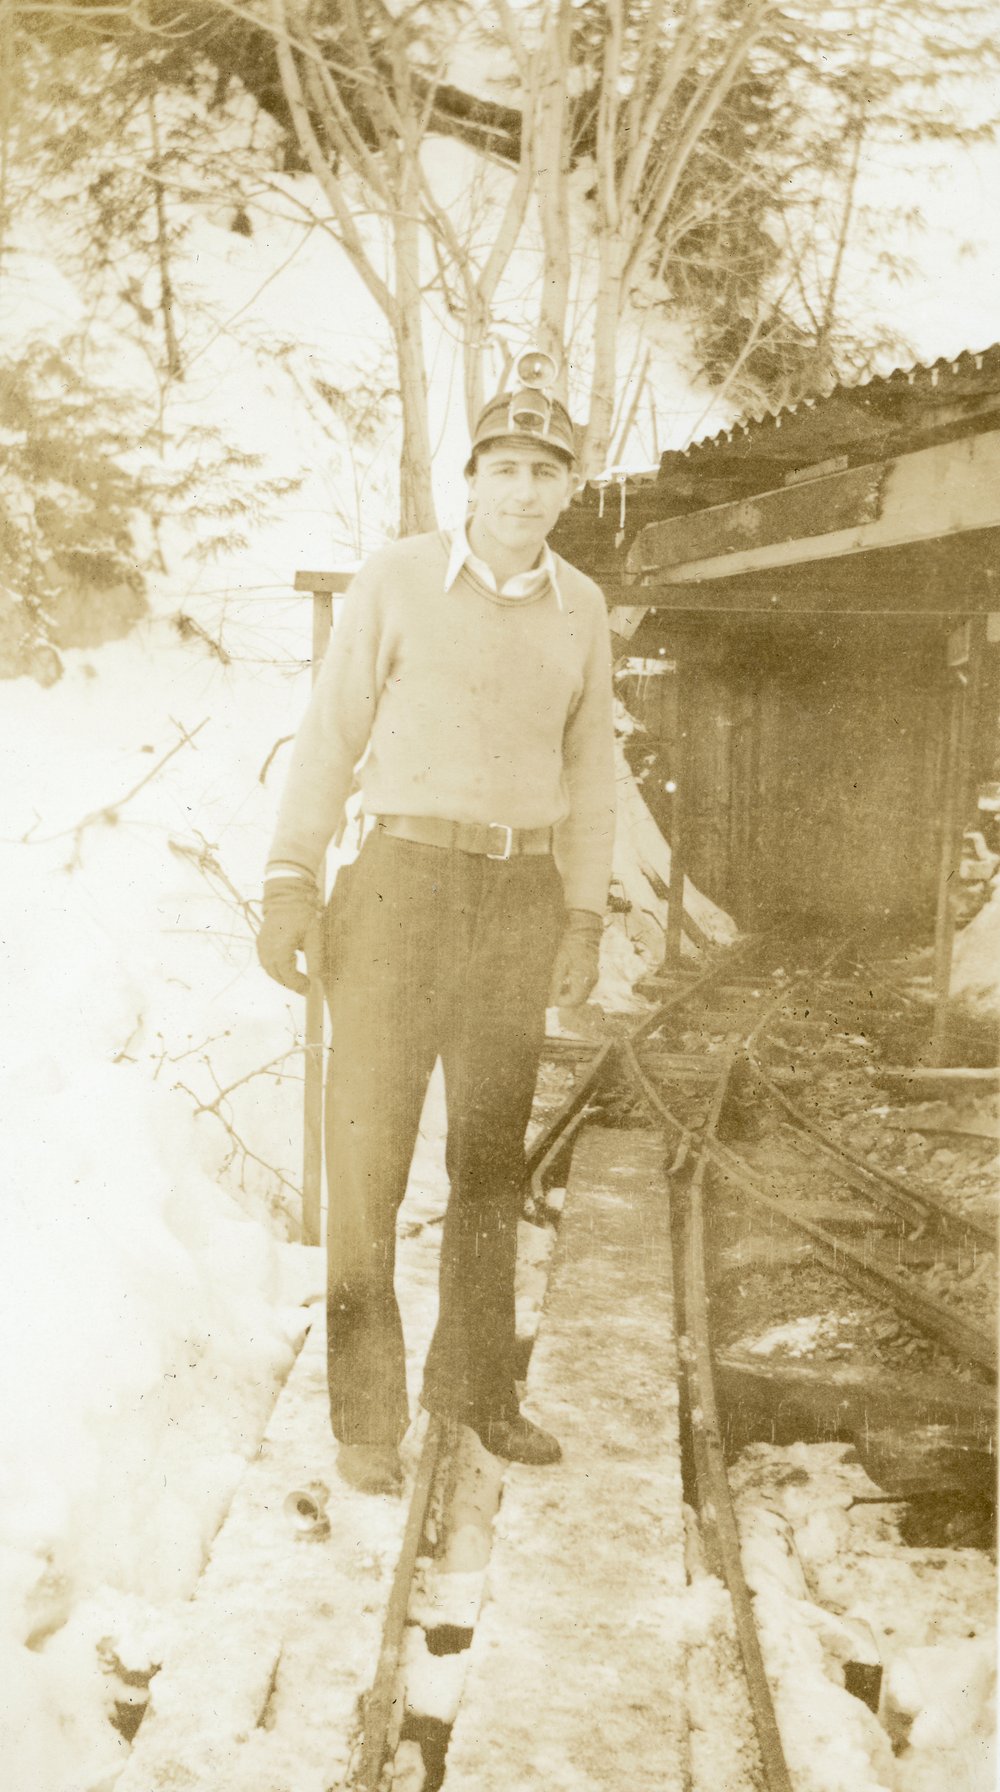  2341.0302: Bill Purcello at the Centre Star Mine in Rossland, January 1943.  Purcello was Jimmy’s friend and co-owner of the Harper-Purcello Training School. 